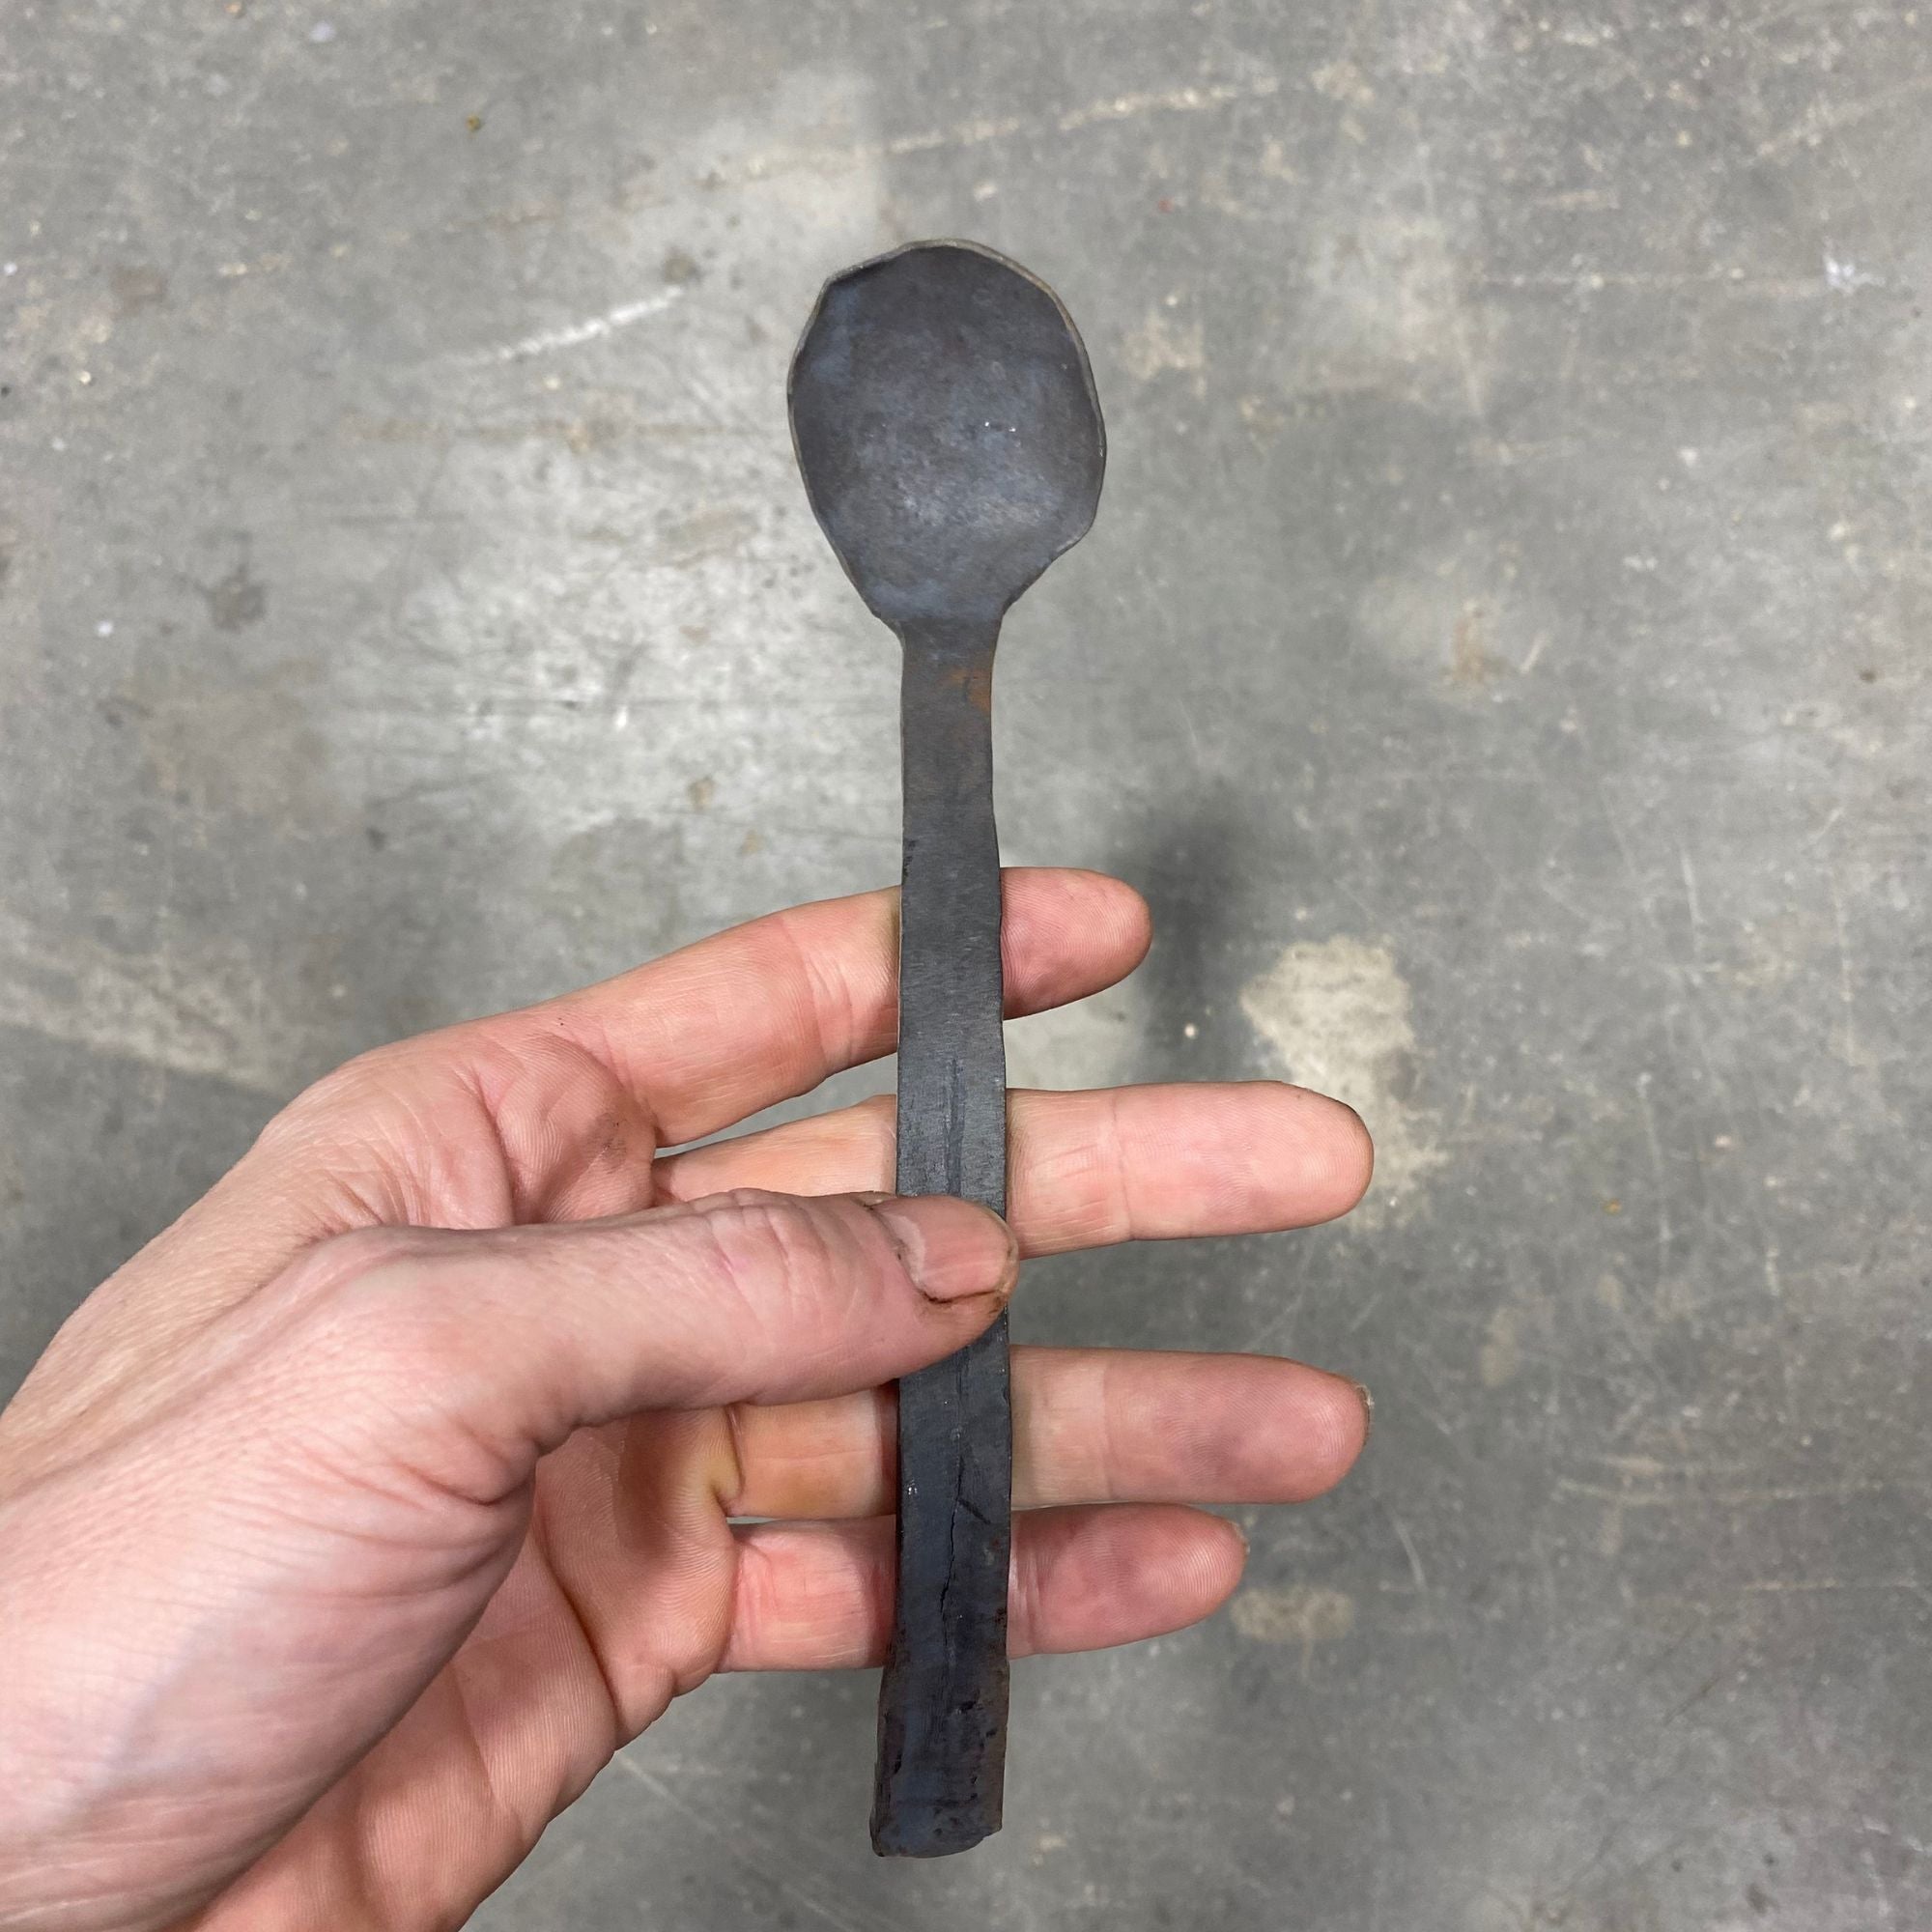 Blacksmith Date Night: Forge a Spoon!